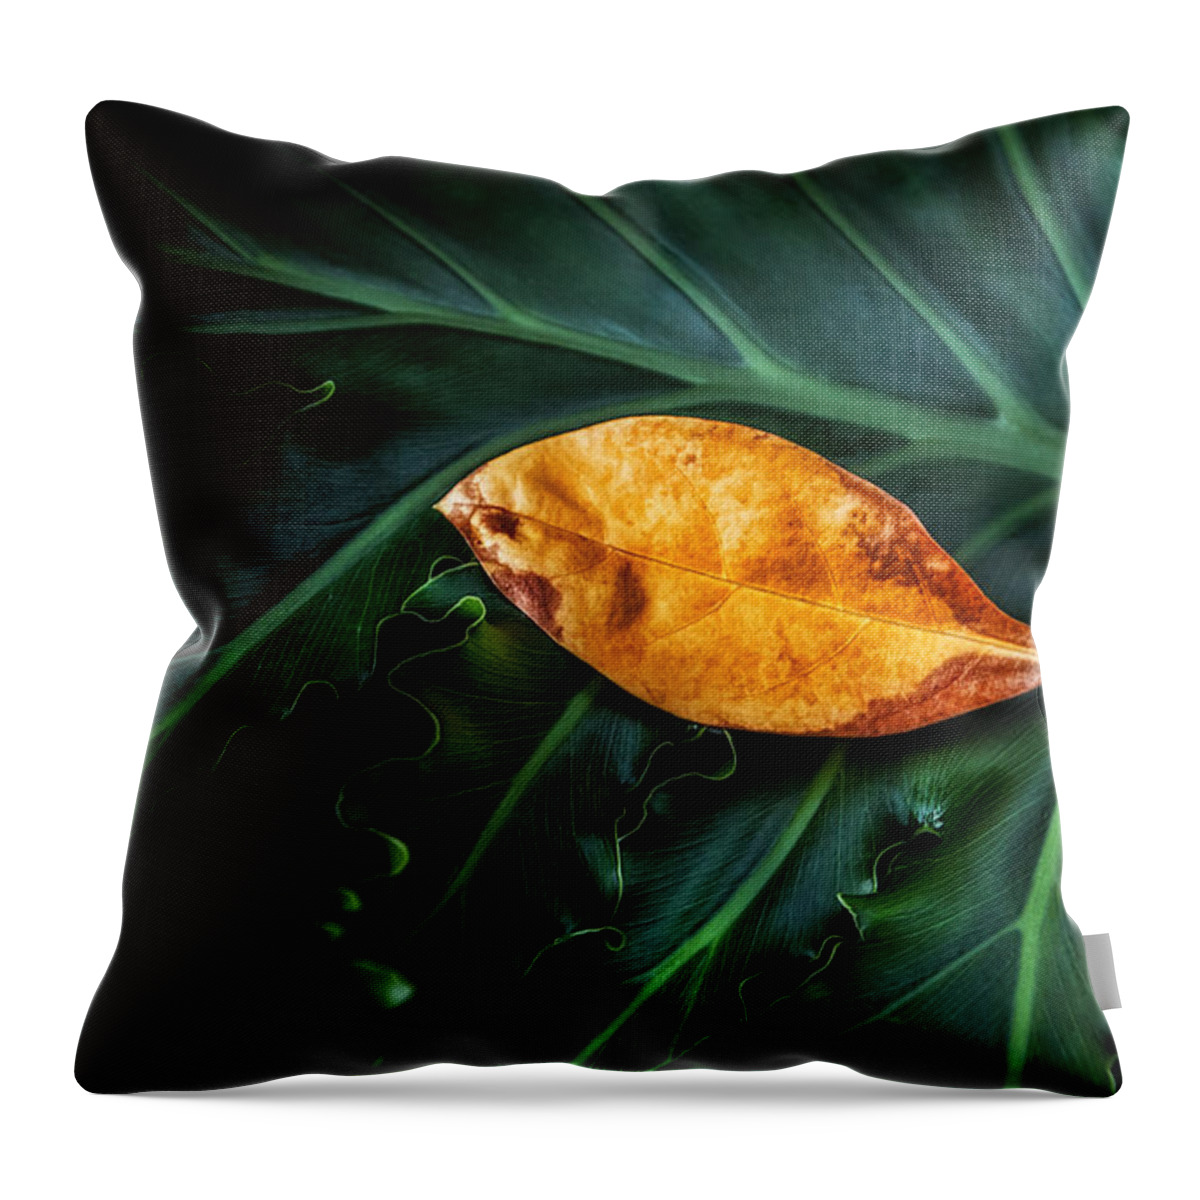 Botanical Throw Pillow featuring the photograph Life Cycle Still Life by Tom Mc Nemar